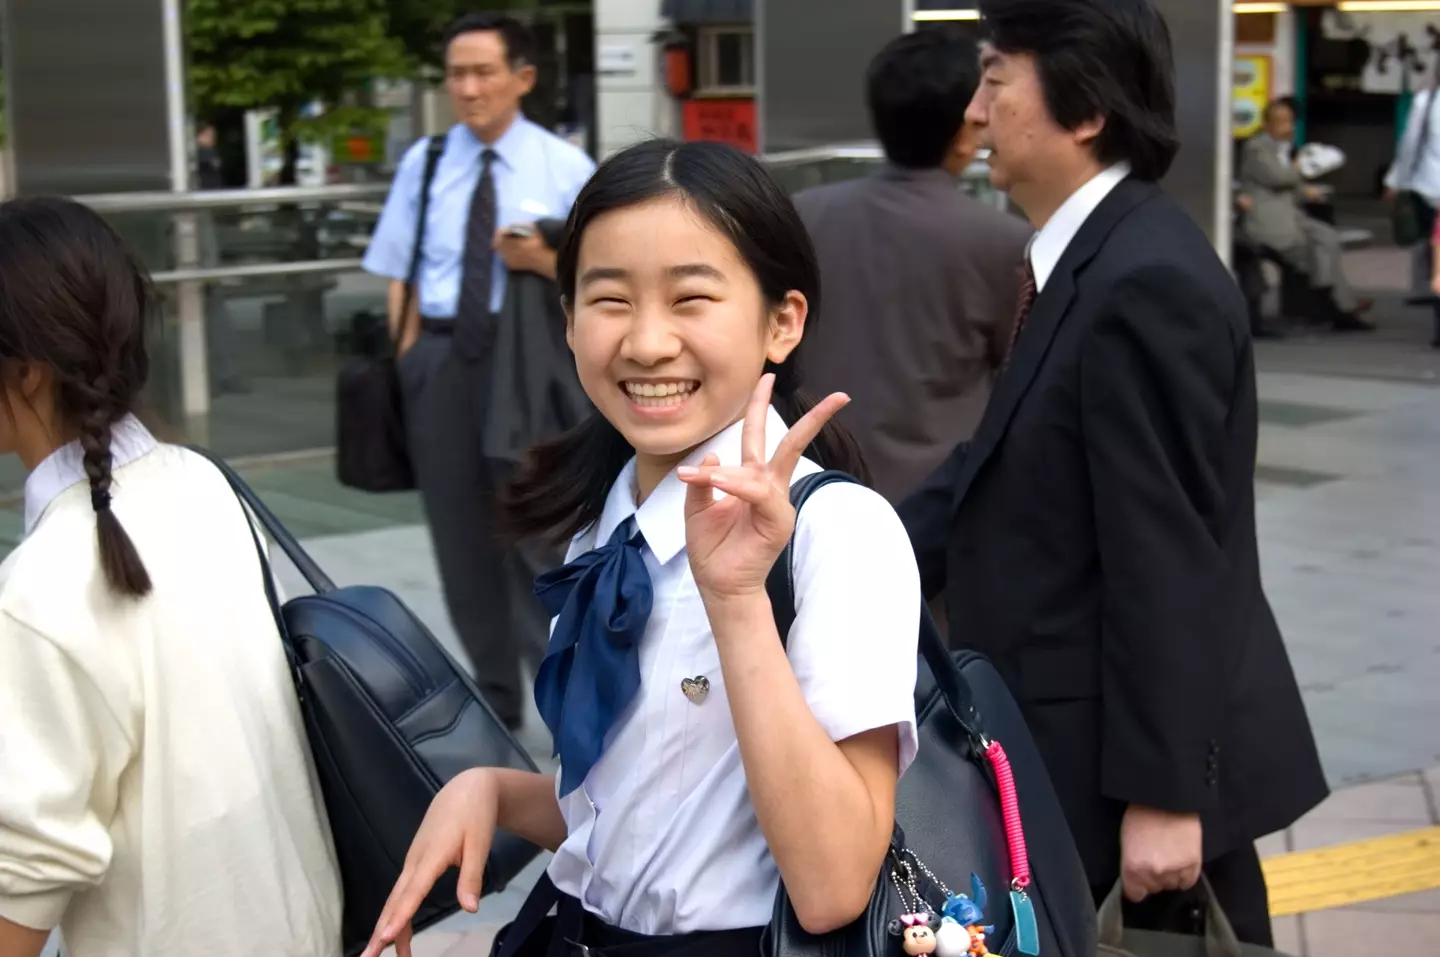 Students in Japan face a wealth of strict rules.